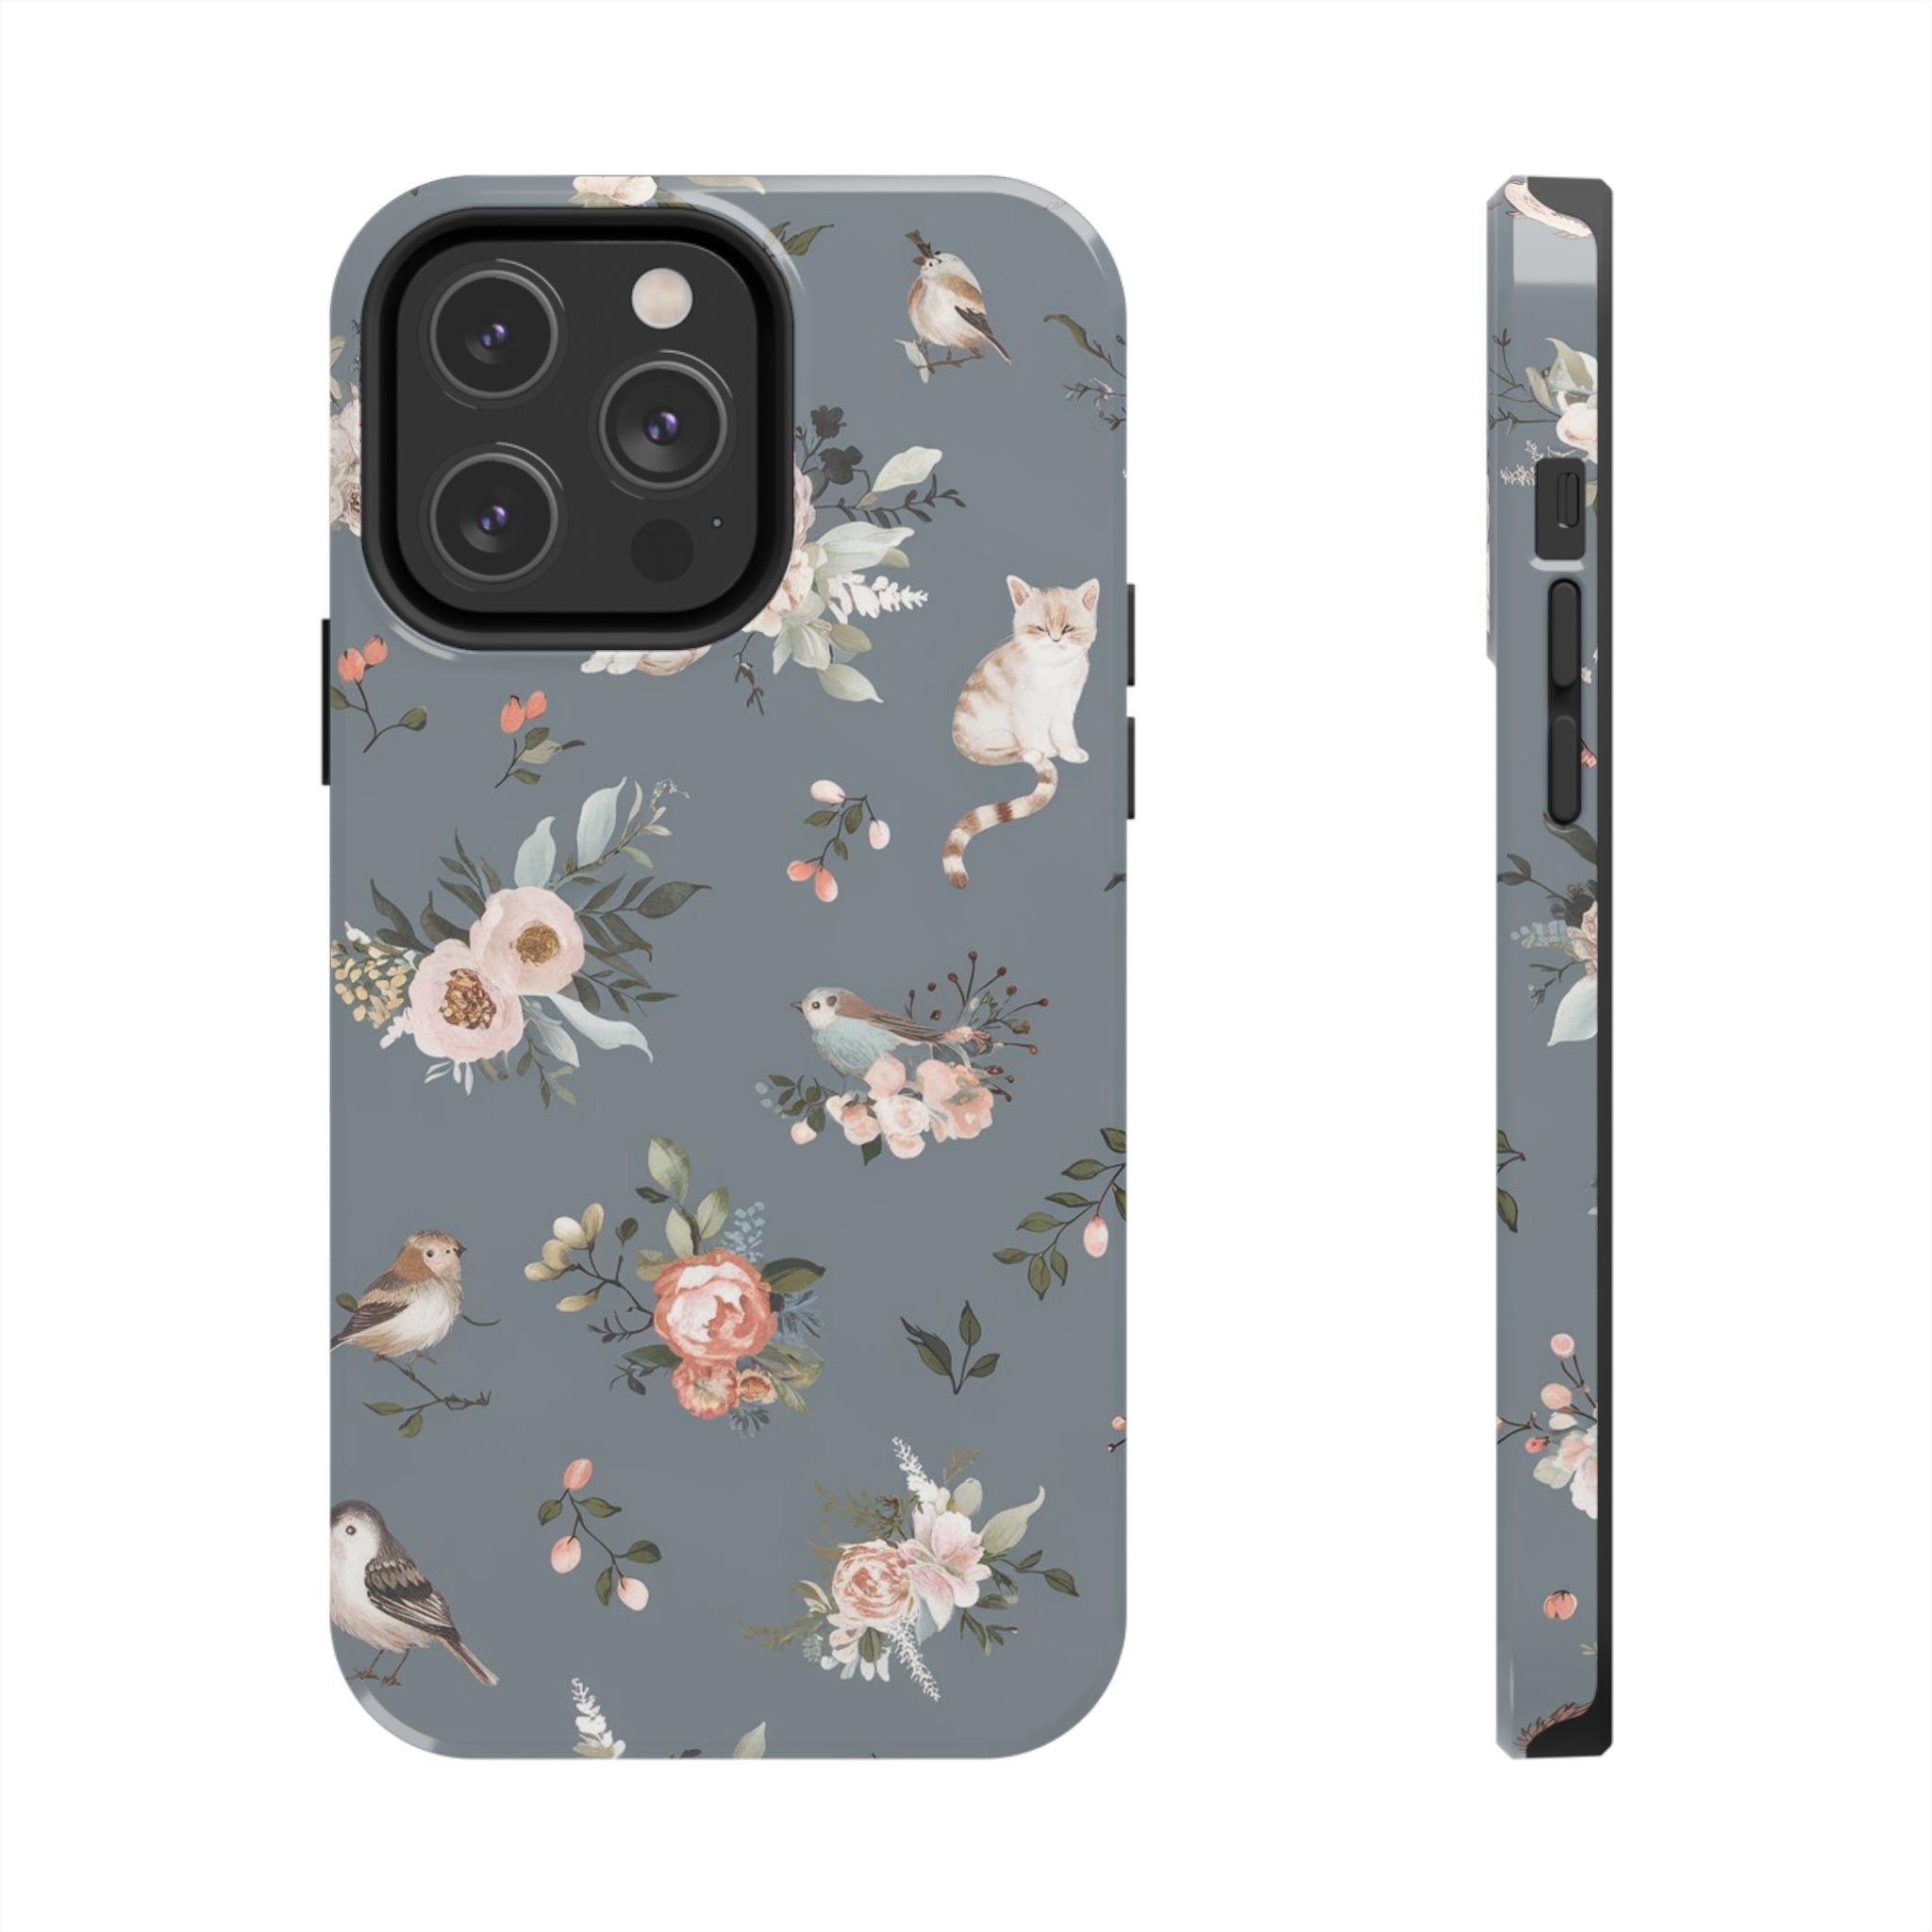 Kitty Cats and Nature - Tough Phone Cases